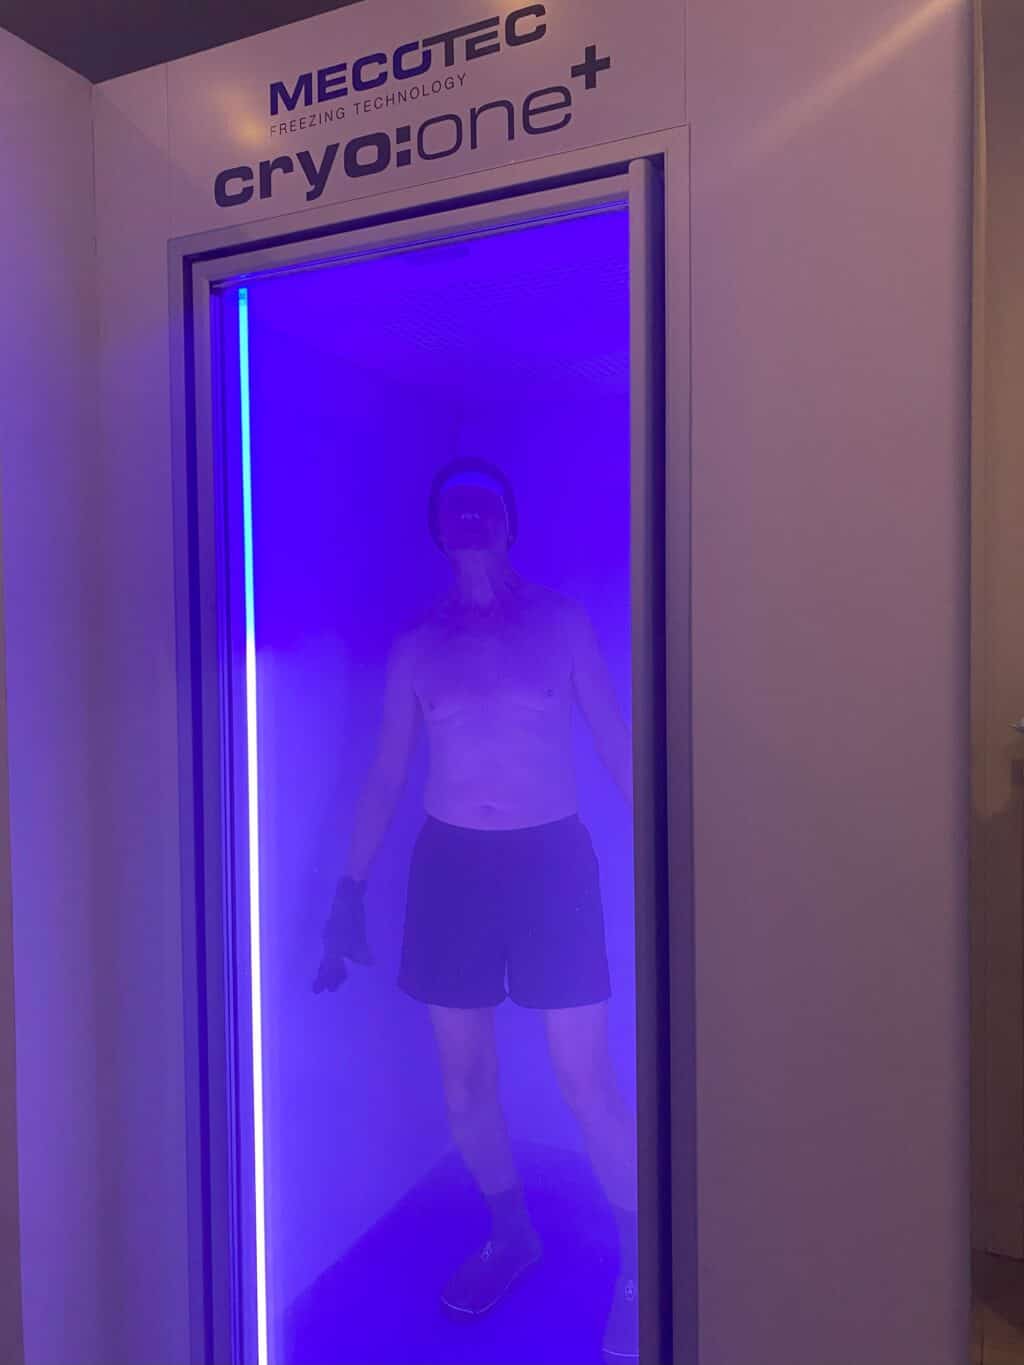 a 71 year old man inside a mecotec cryo one cryotherapy chamber, he is shirtless and the chamber is lit with blue light